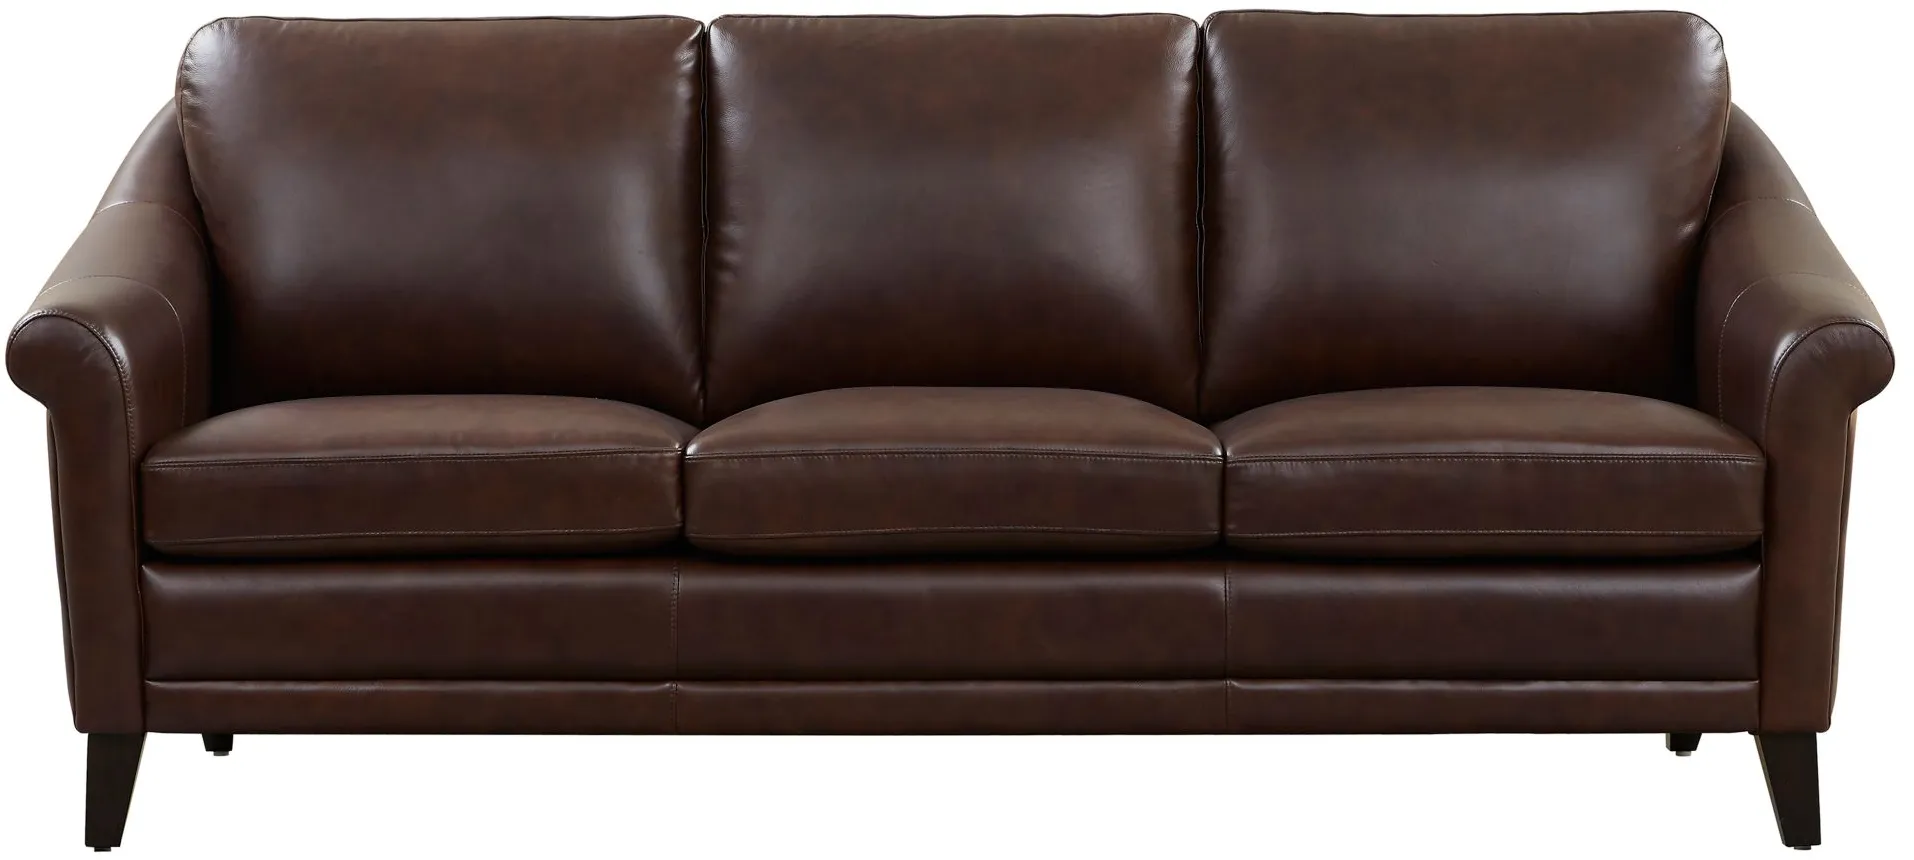 Soler Sofa in Brown by GTR Leather Inc